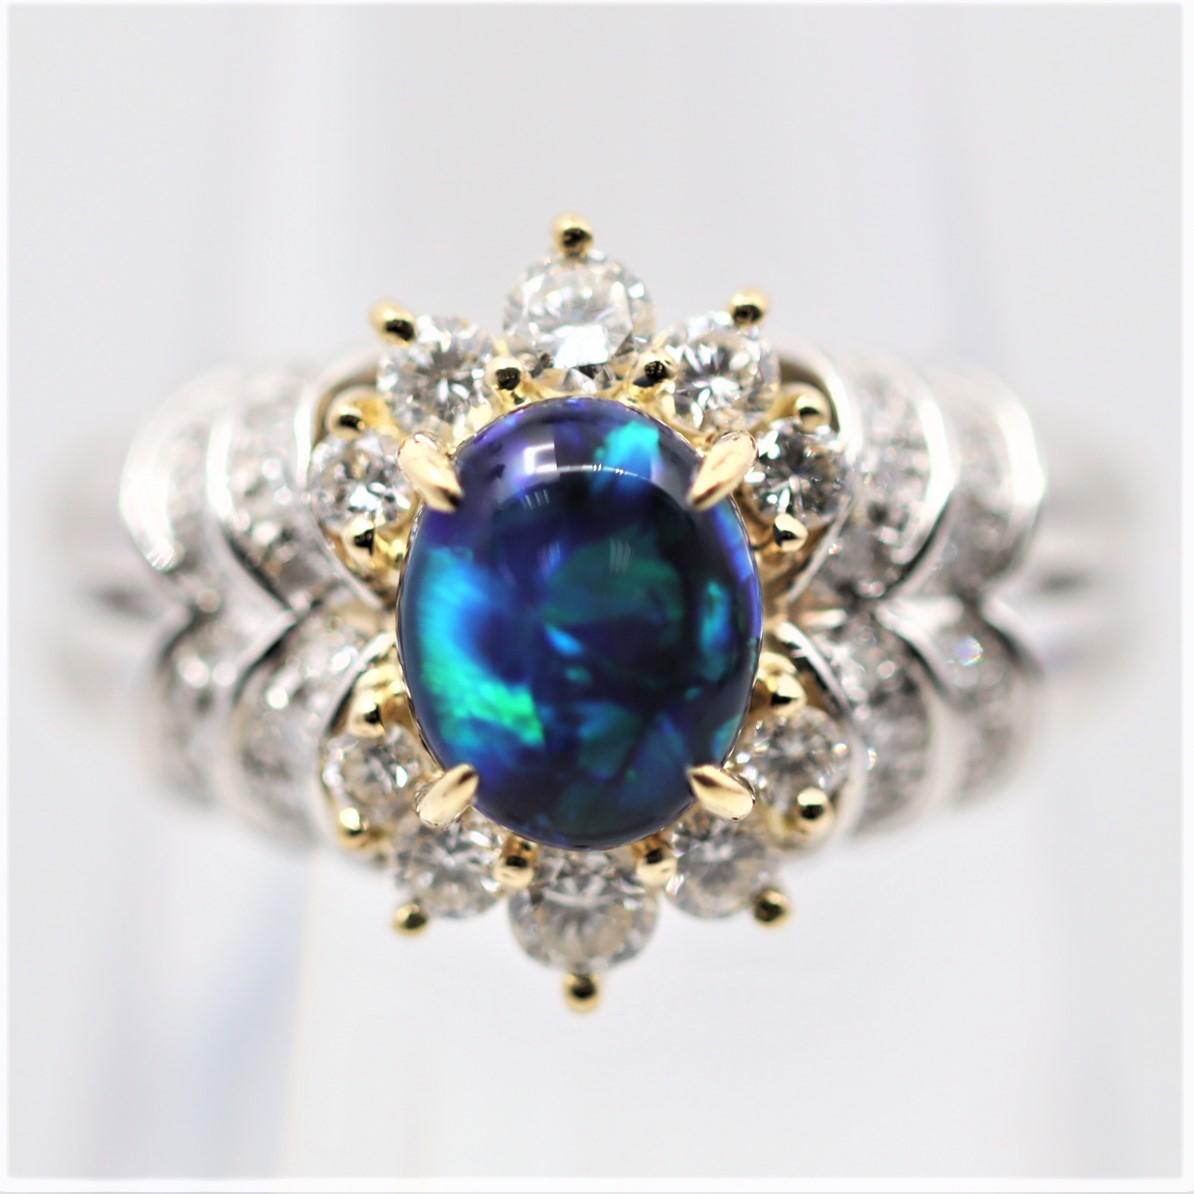 A sleek and stylish ring featuring a 1.30 carat black opal from Australia, Lighting Ridge area. It has excellent play of color as bright flashes of blue and green dance across the stone as it is moved. It is accented by 0.69 carats of round